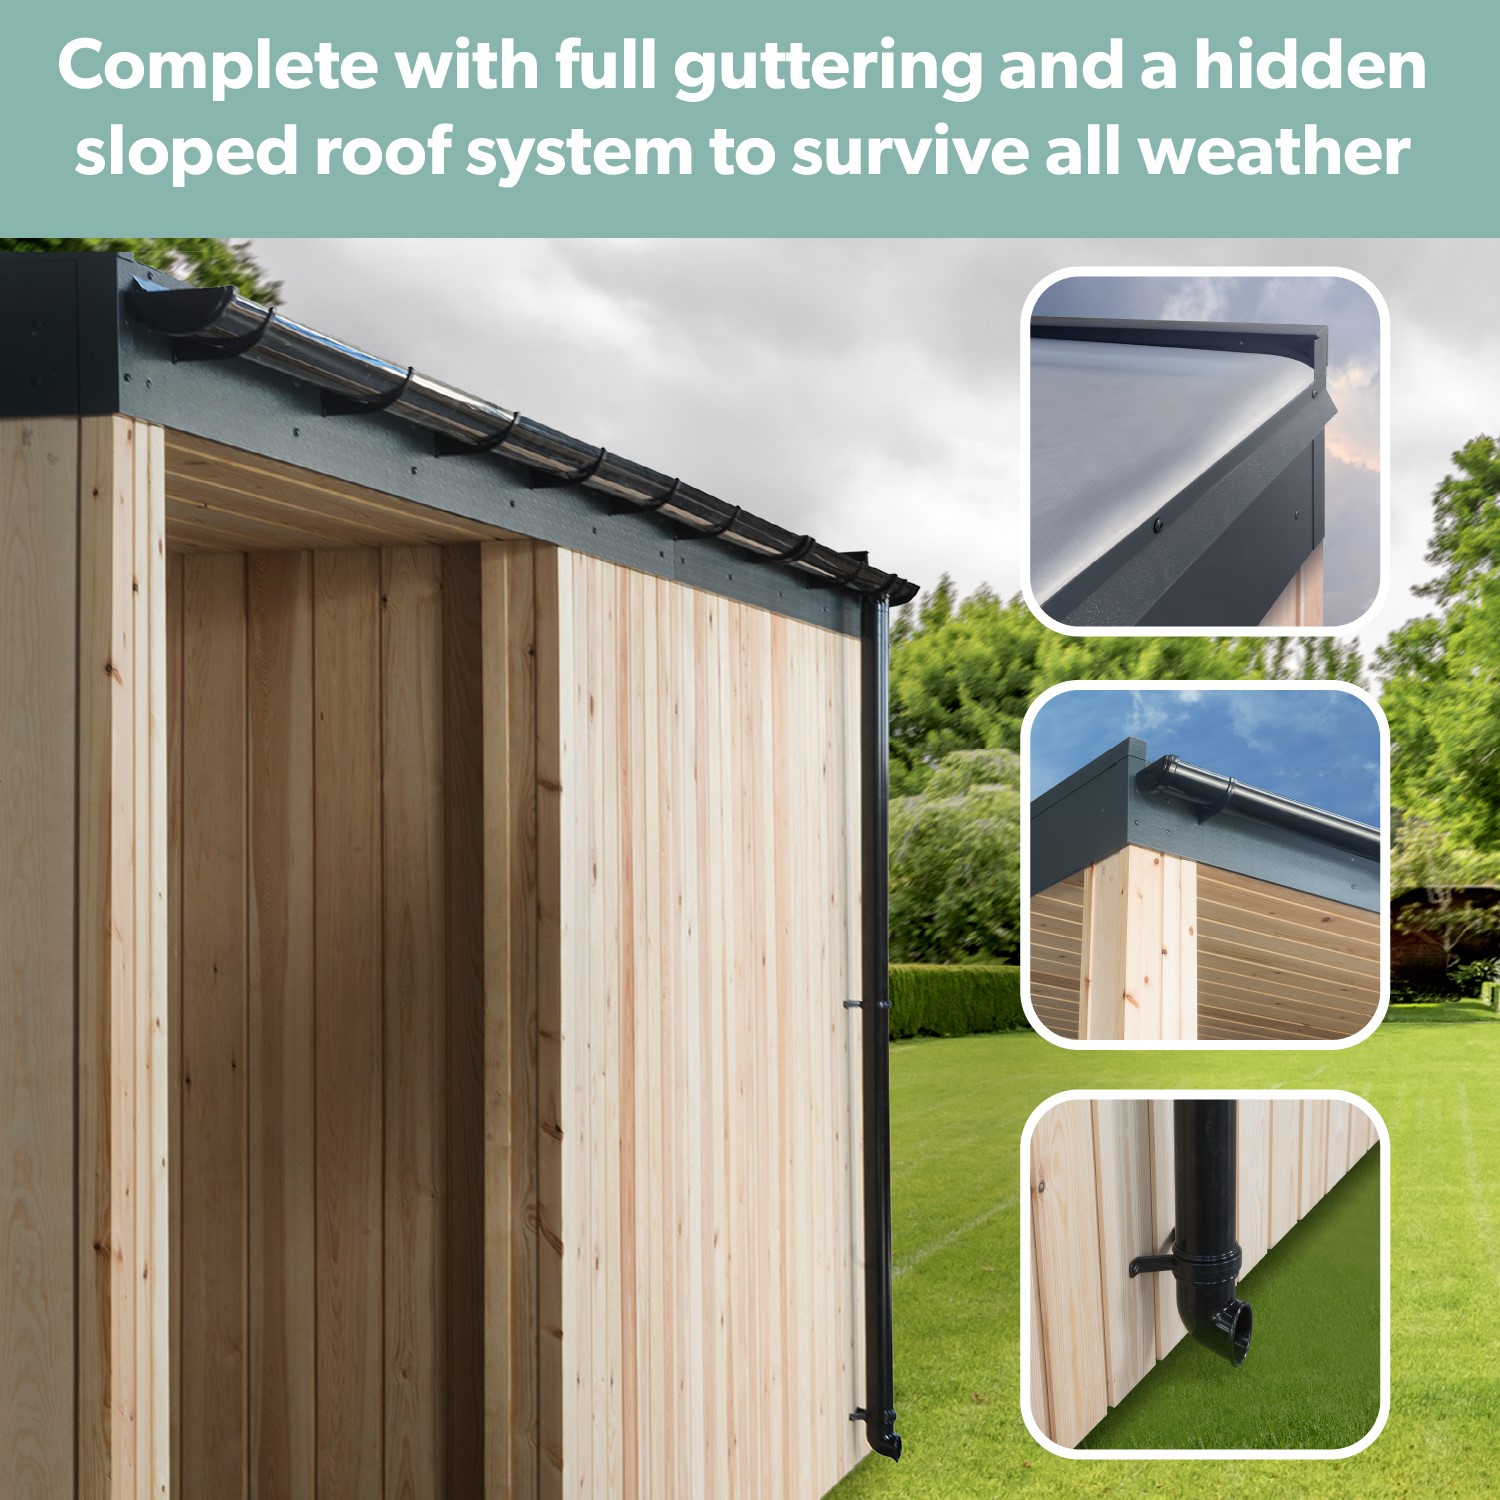 Read more about Insulated wooden garden room 2.5m x 3.4m lusso